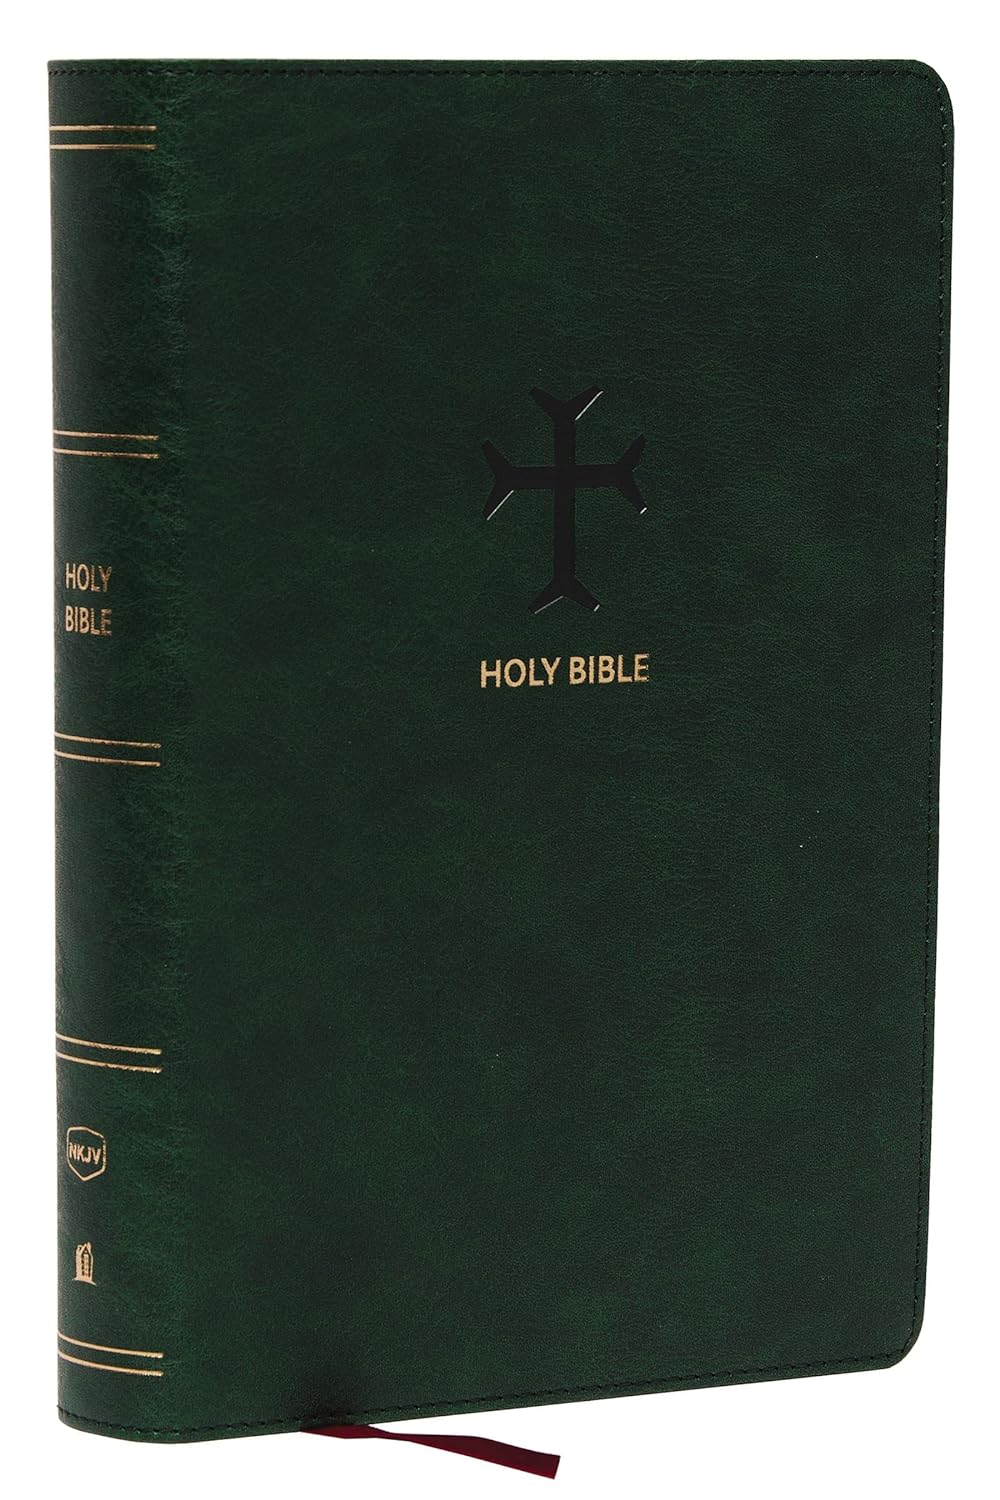 NKJV Large Print Personal Size End-of-Verse Reference